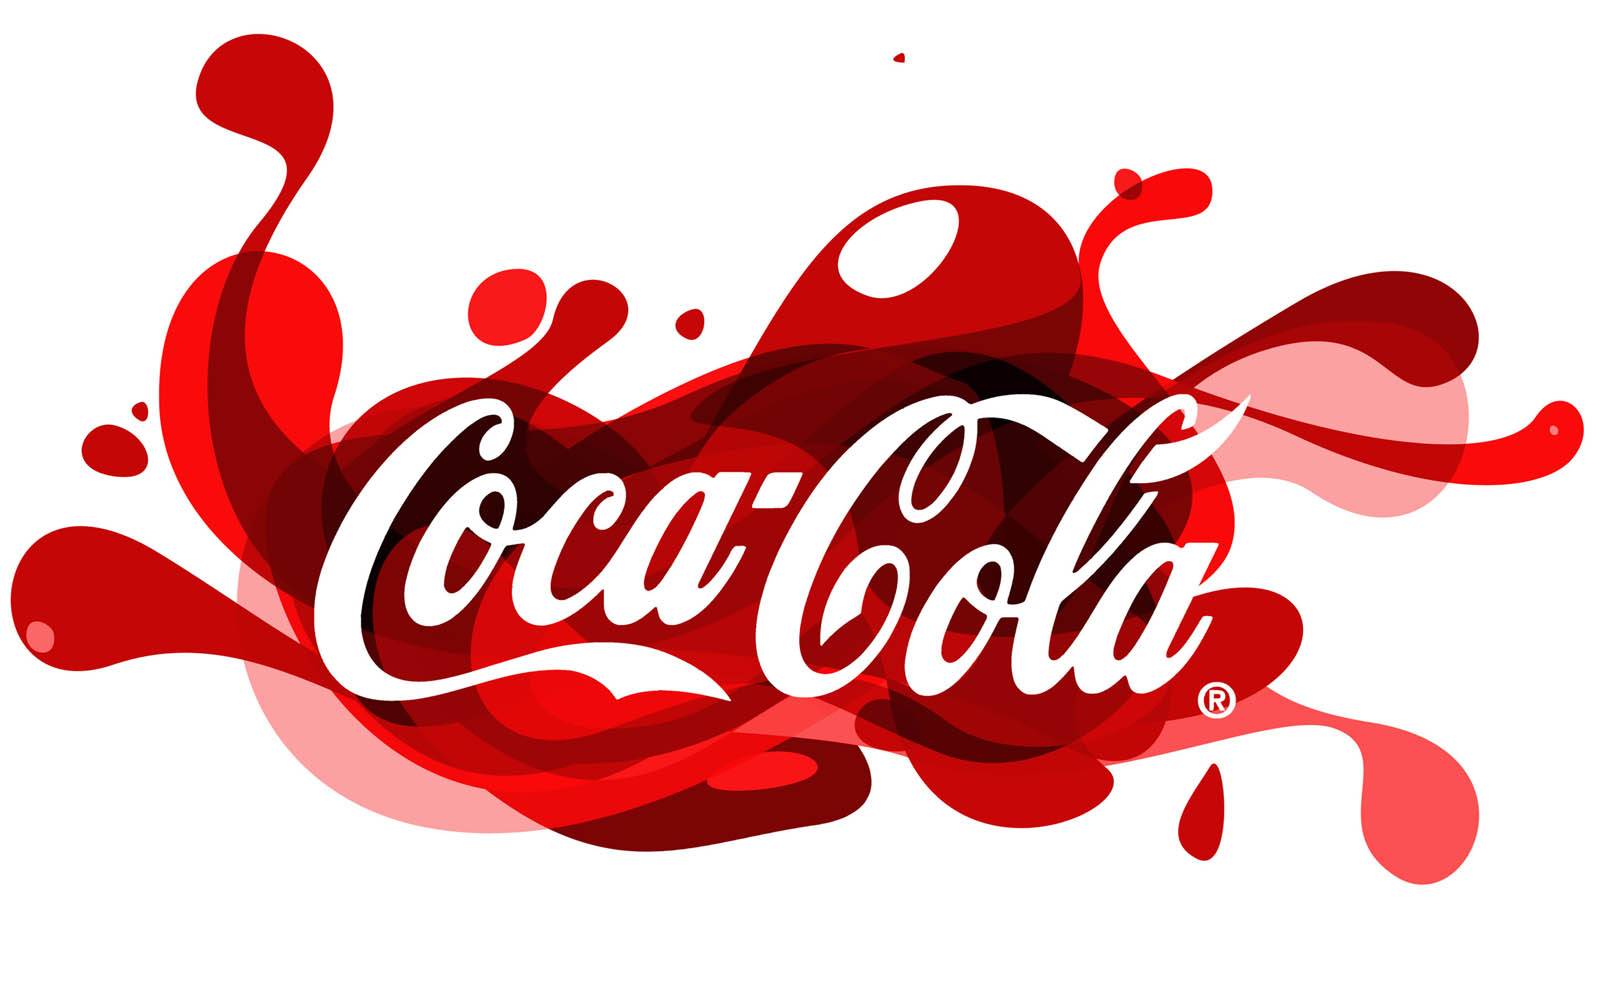 Tag Coca Cola Wallpapers Backgrounds PhotosImages and Pictures for